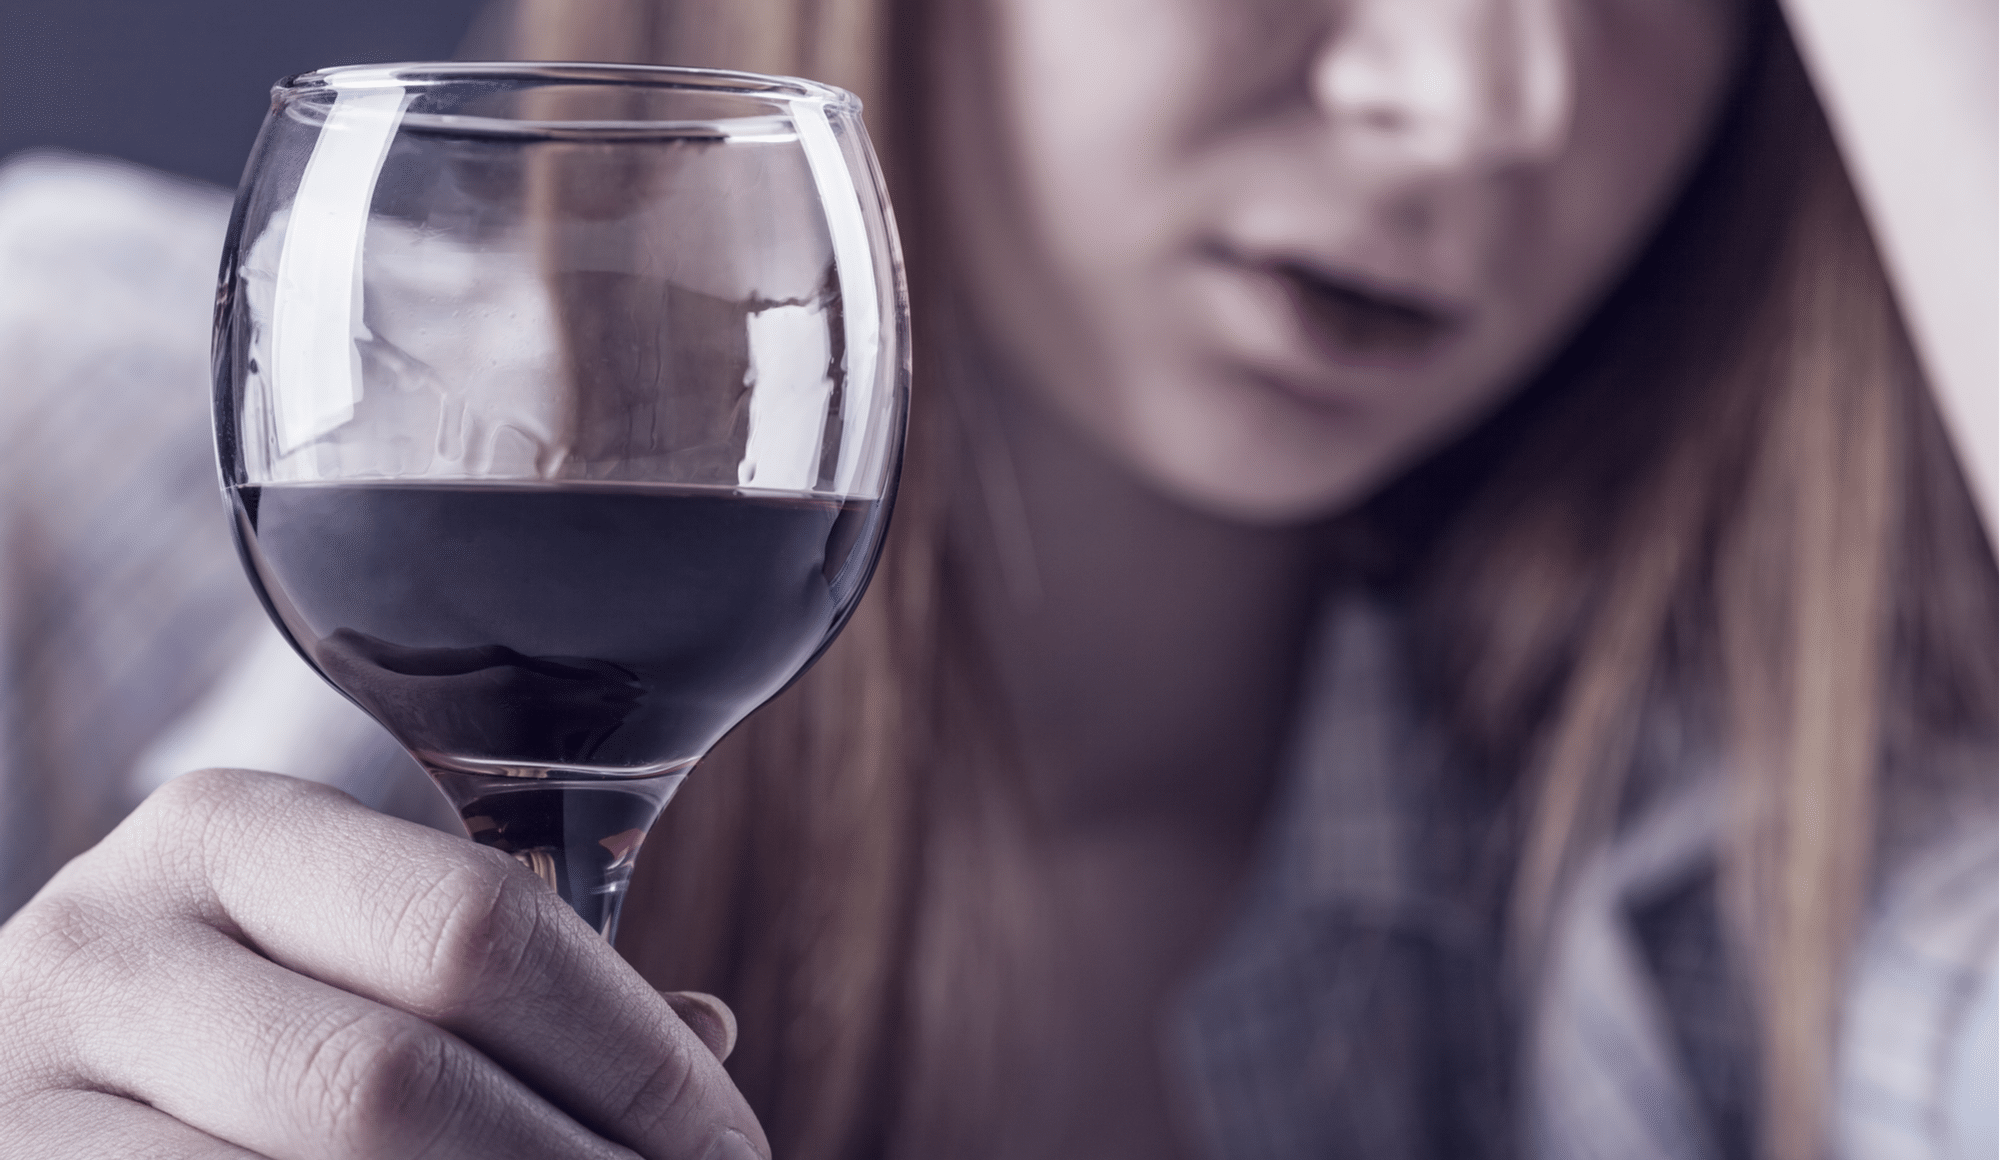 How Can You Get Sober from Alcohol? - Pathfinders Recovery Center - A woman is questioning, "How can you get sober from alcohol?" as she sits at her counter with another glass of wine.